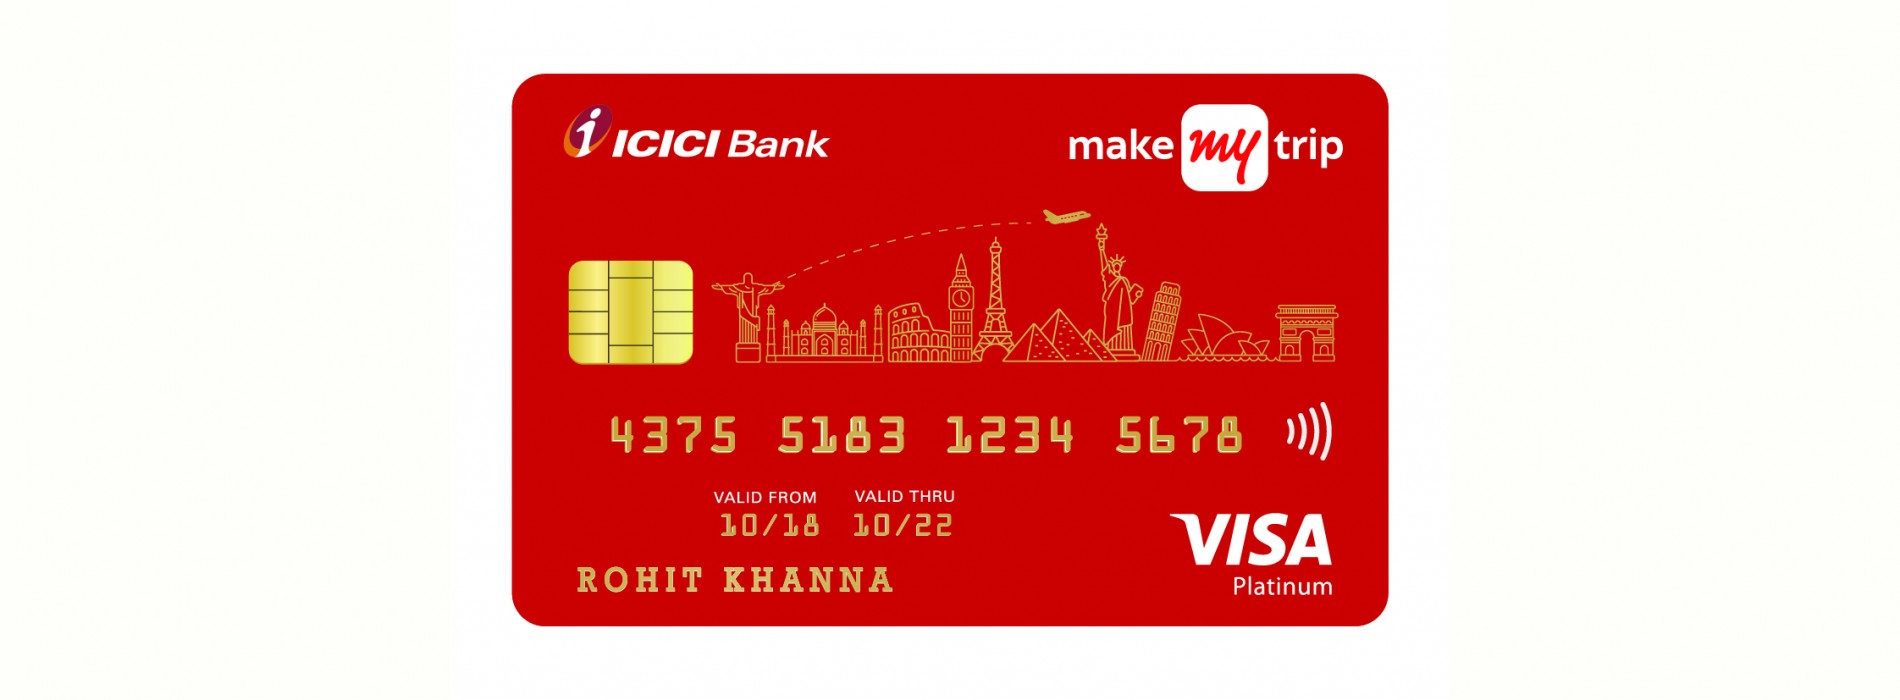 ICICI Bank ties-up with MakeMyTrip